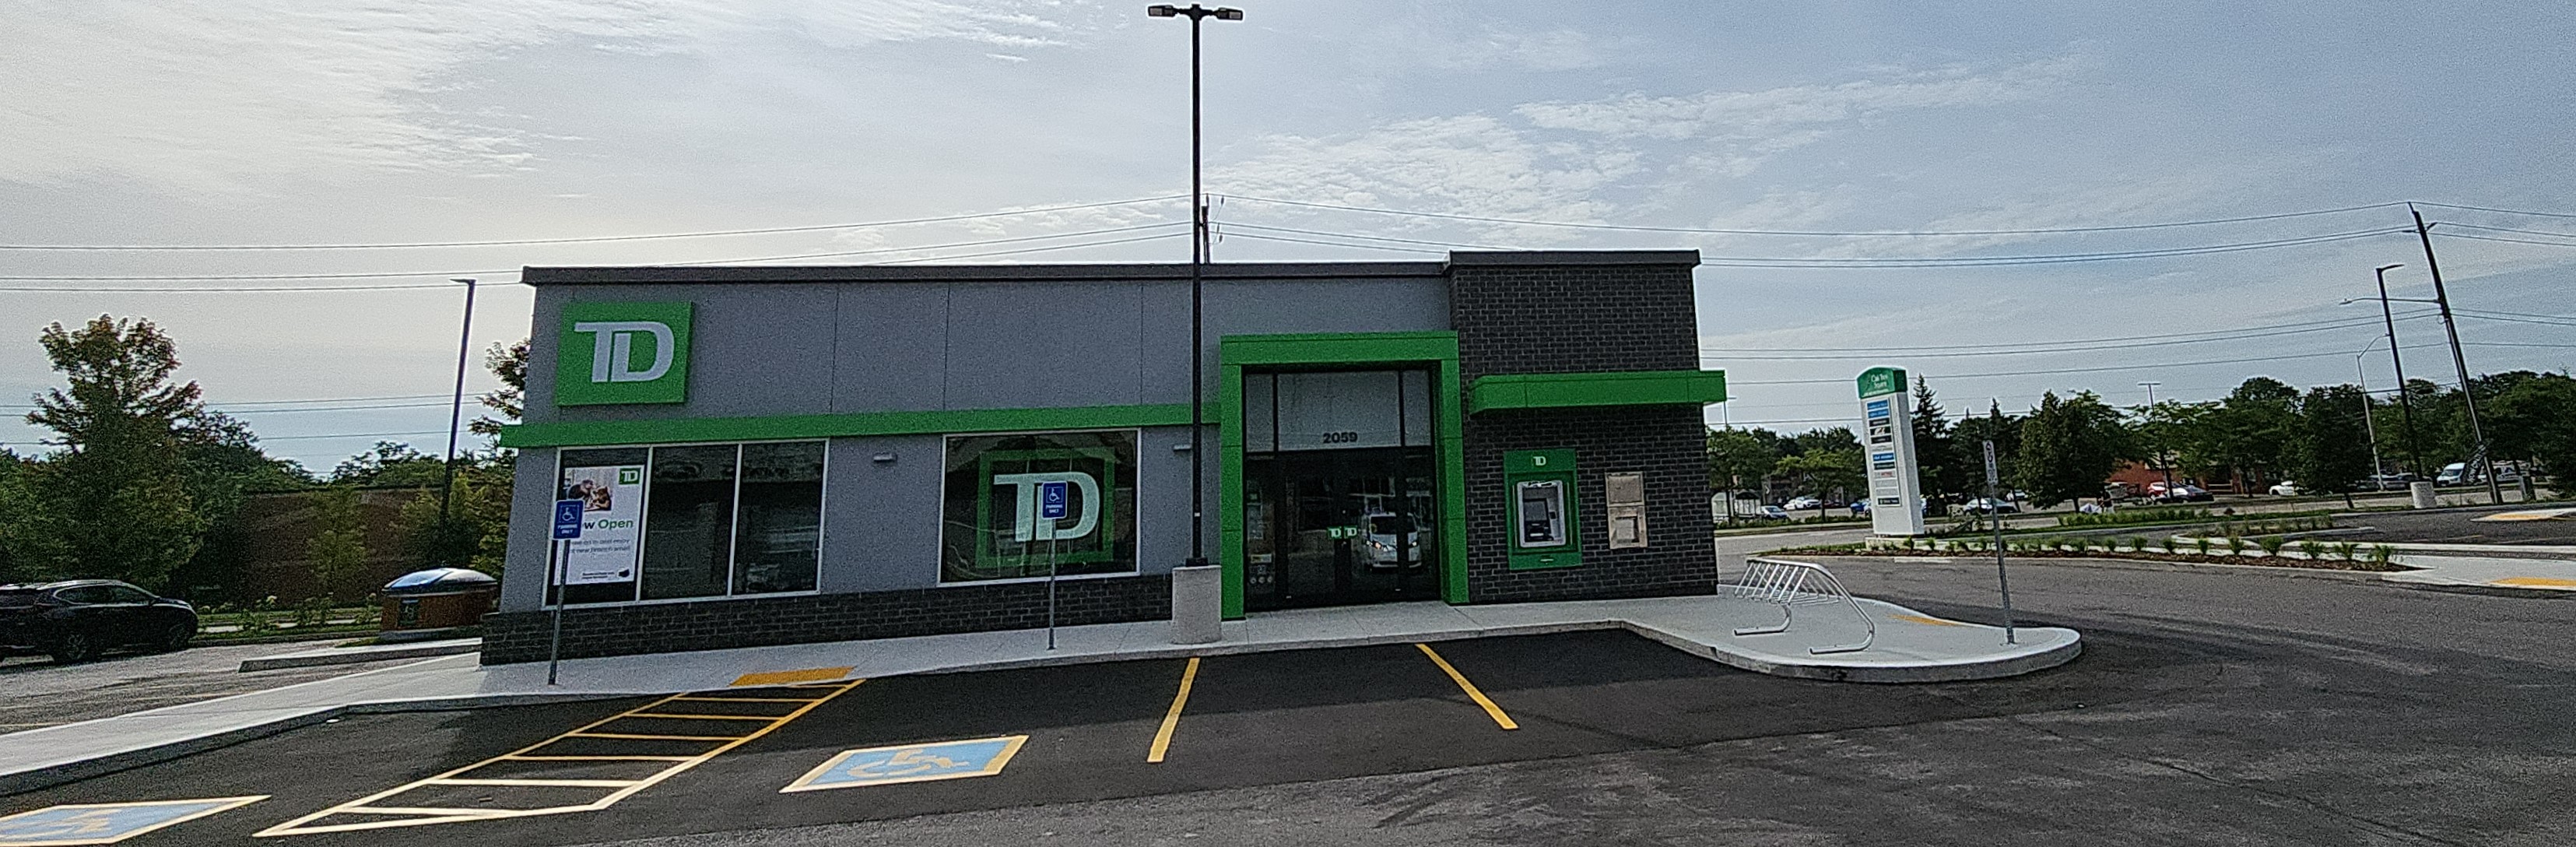 Images TD Canada Trust Branch and ATM